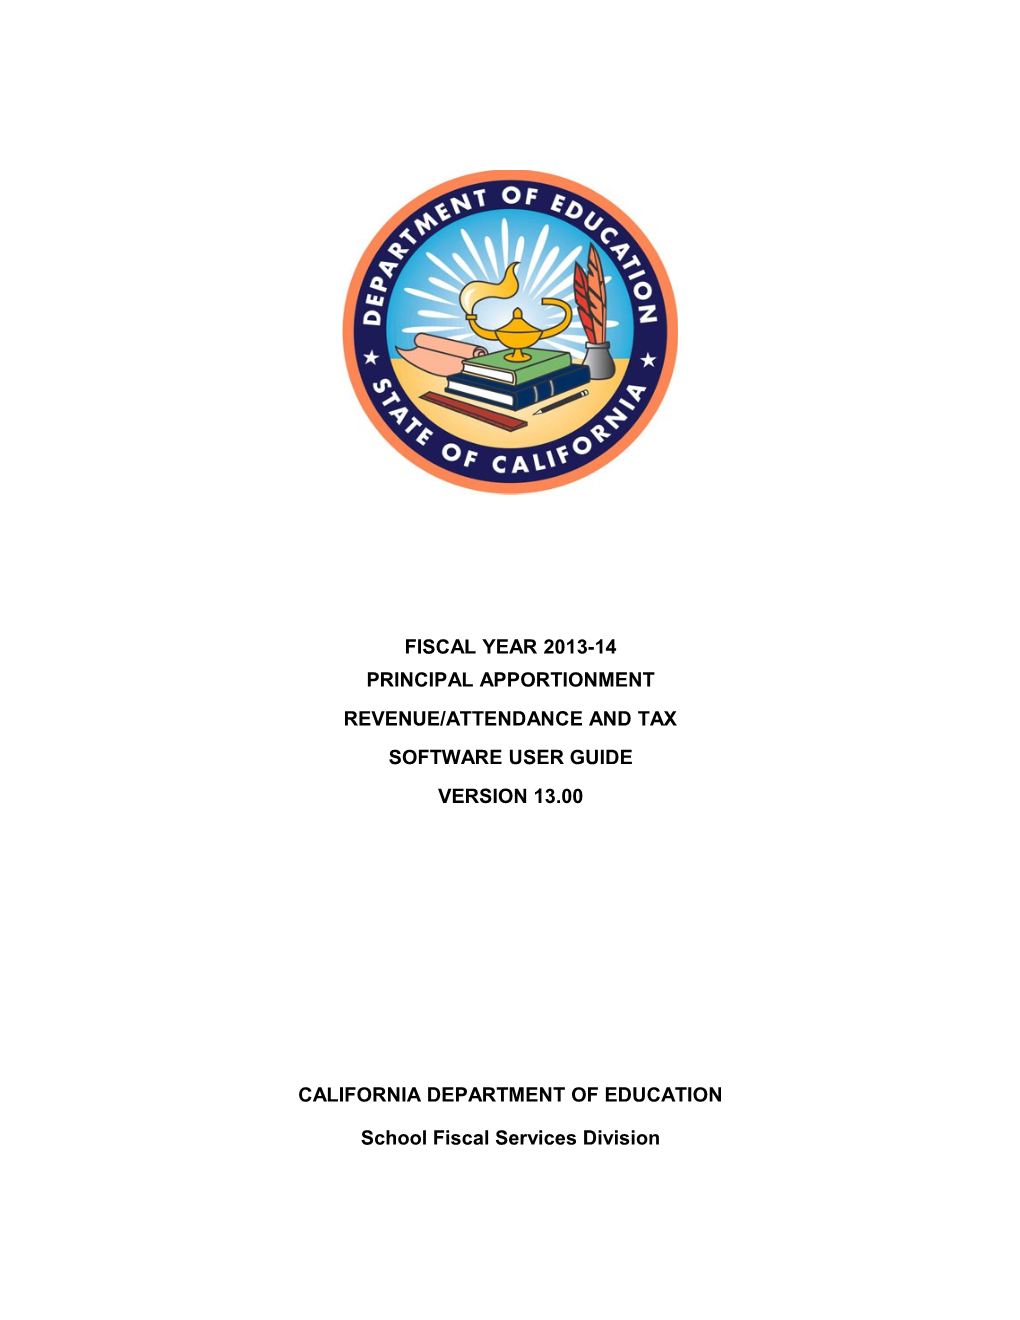 PA Software User Guide, FY 2013-14 - Principal Apportionment (CA Dept of Education)